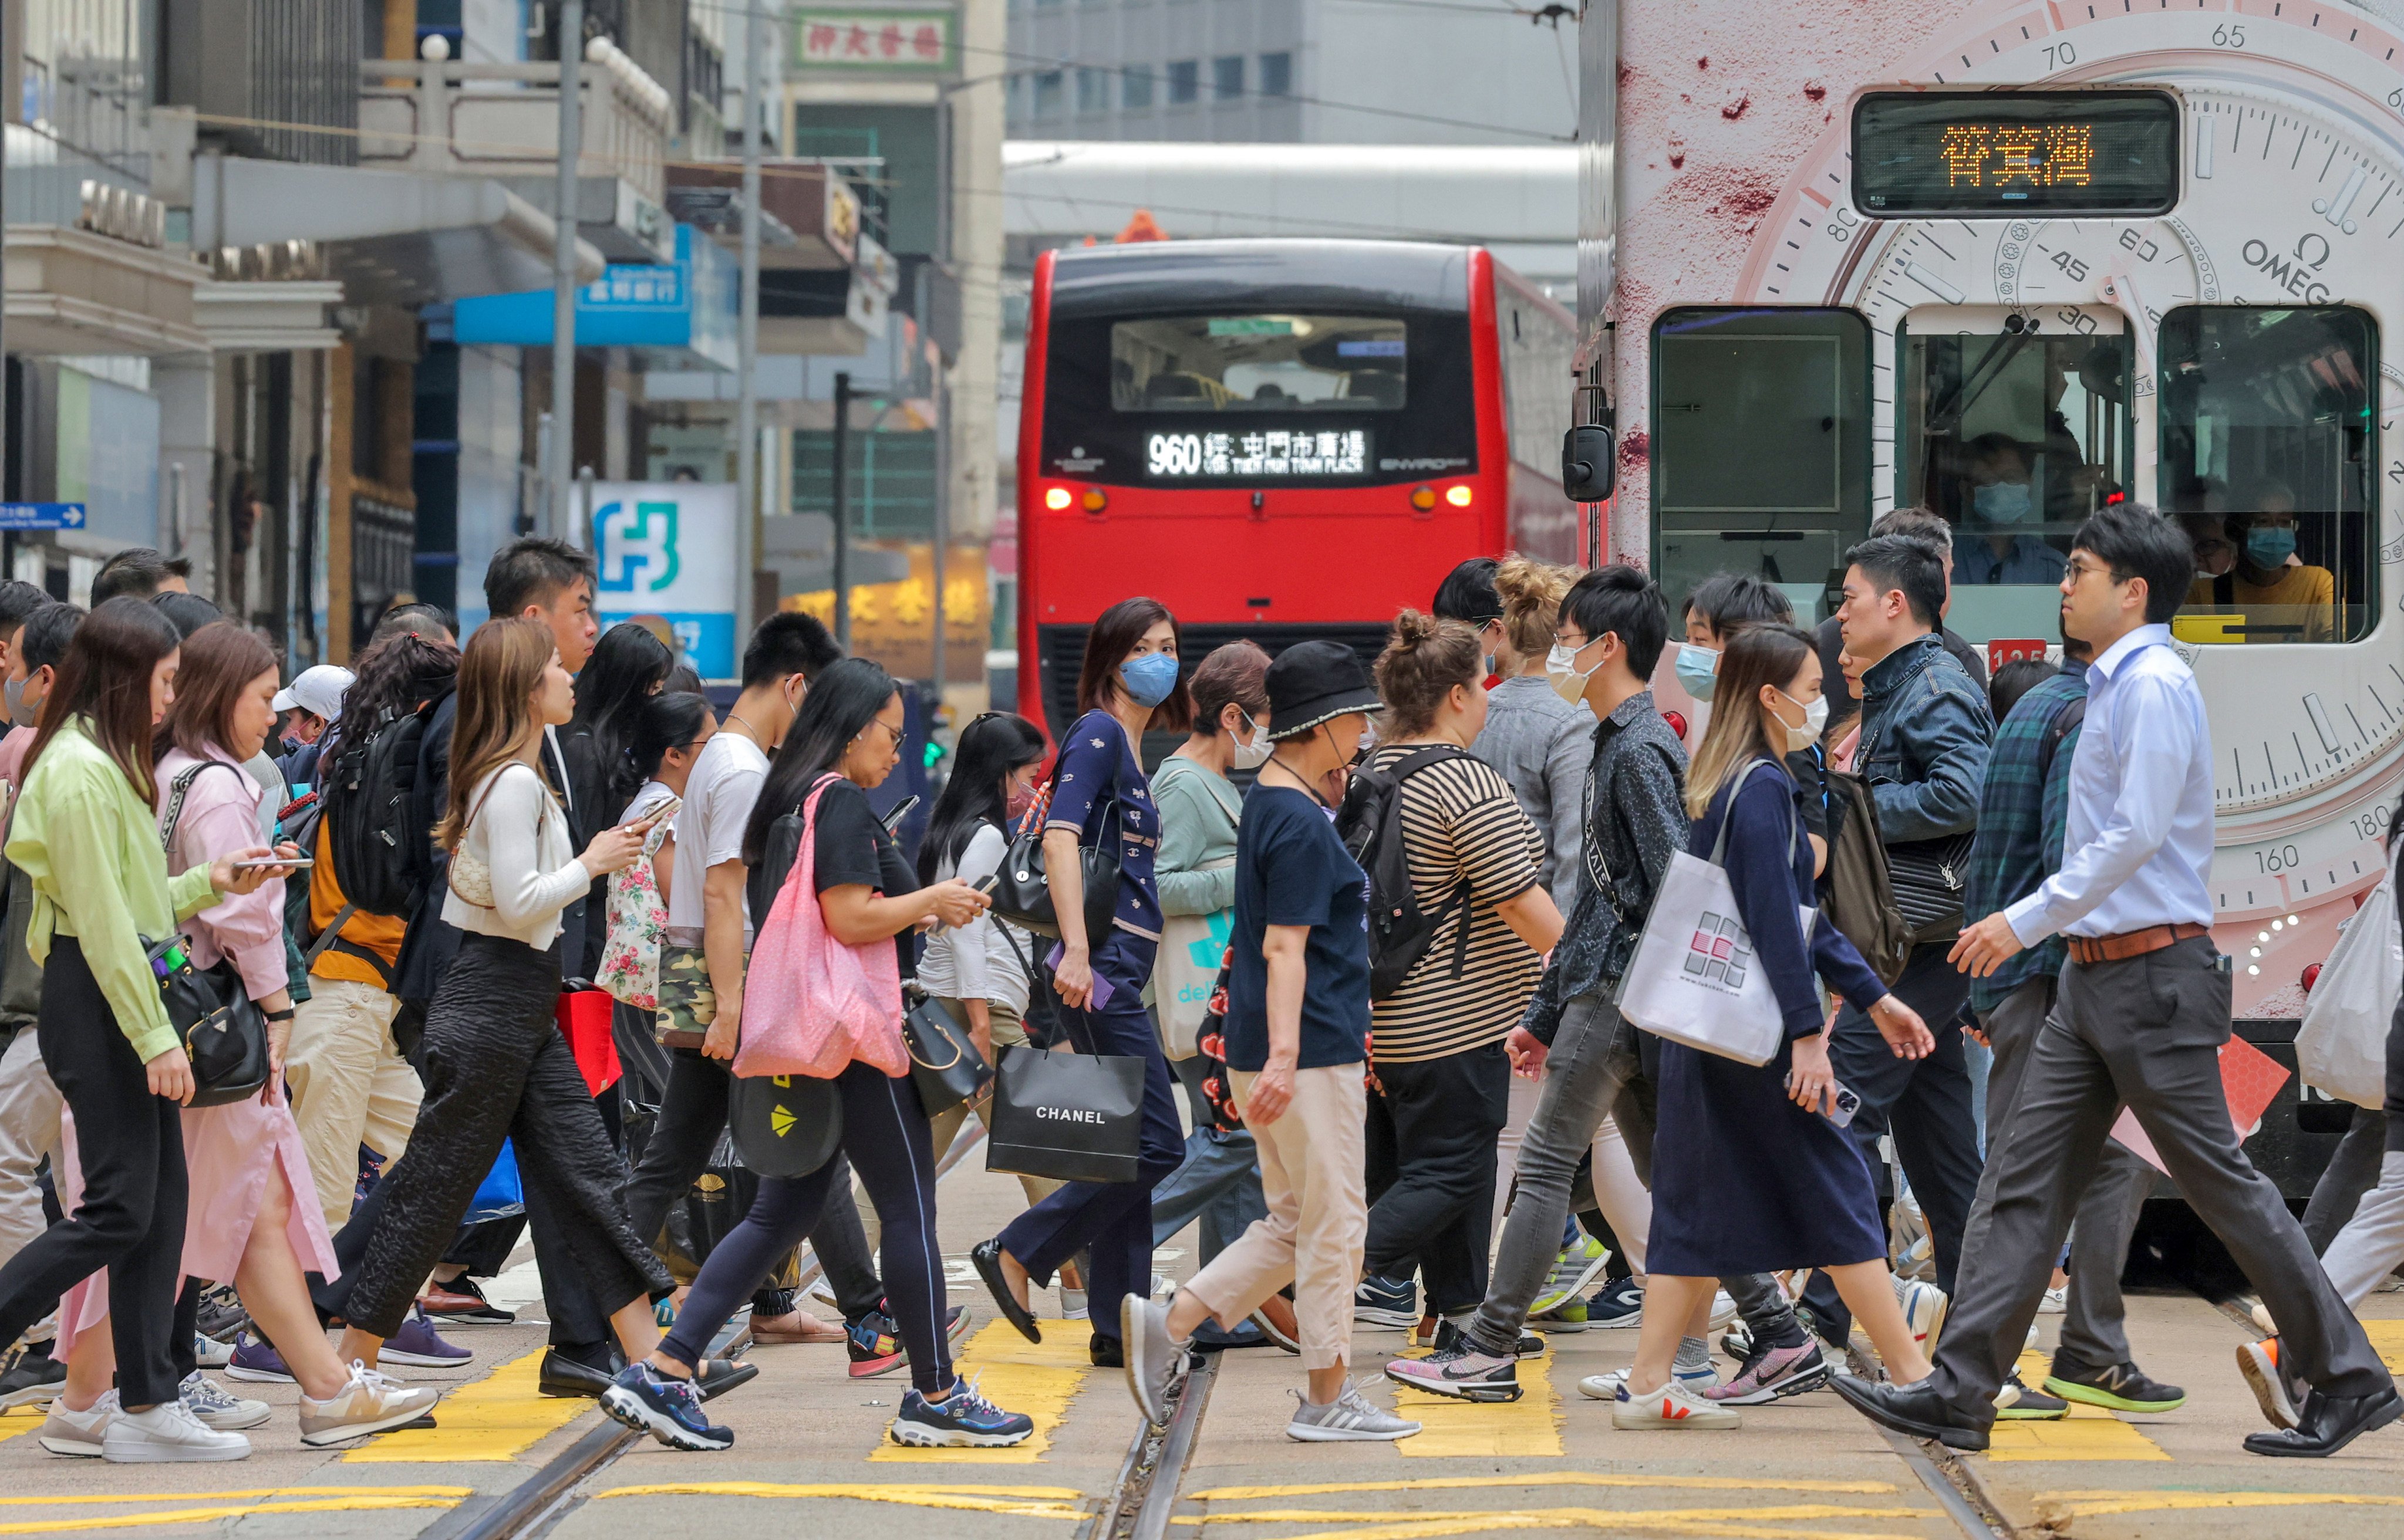 Some Hongkongers choosing to wear masks may be helping to keep a flu outbreak under control, says a government health adviser. Photo: Jelly Tse